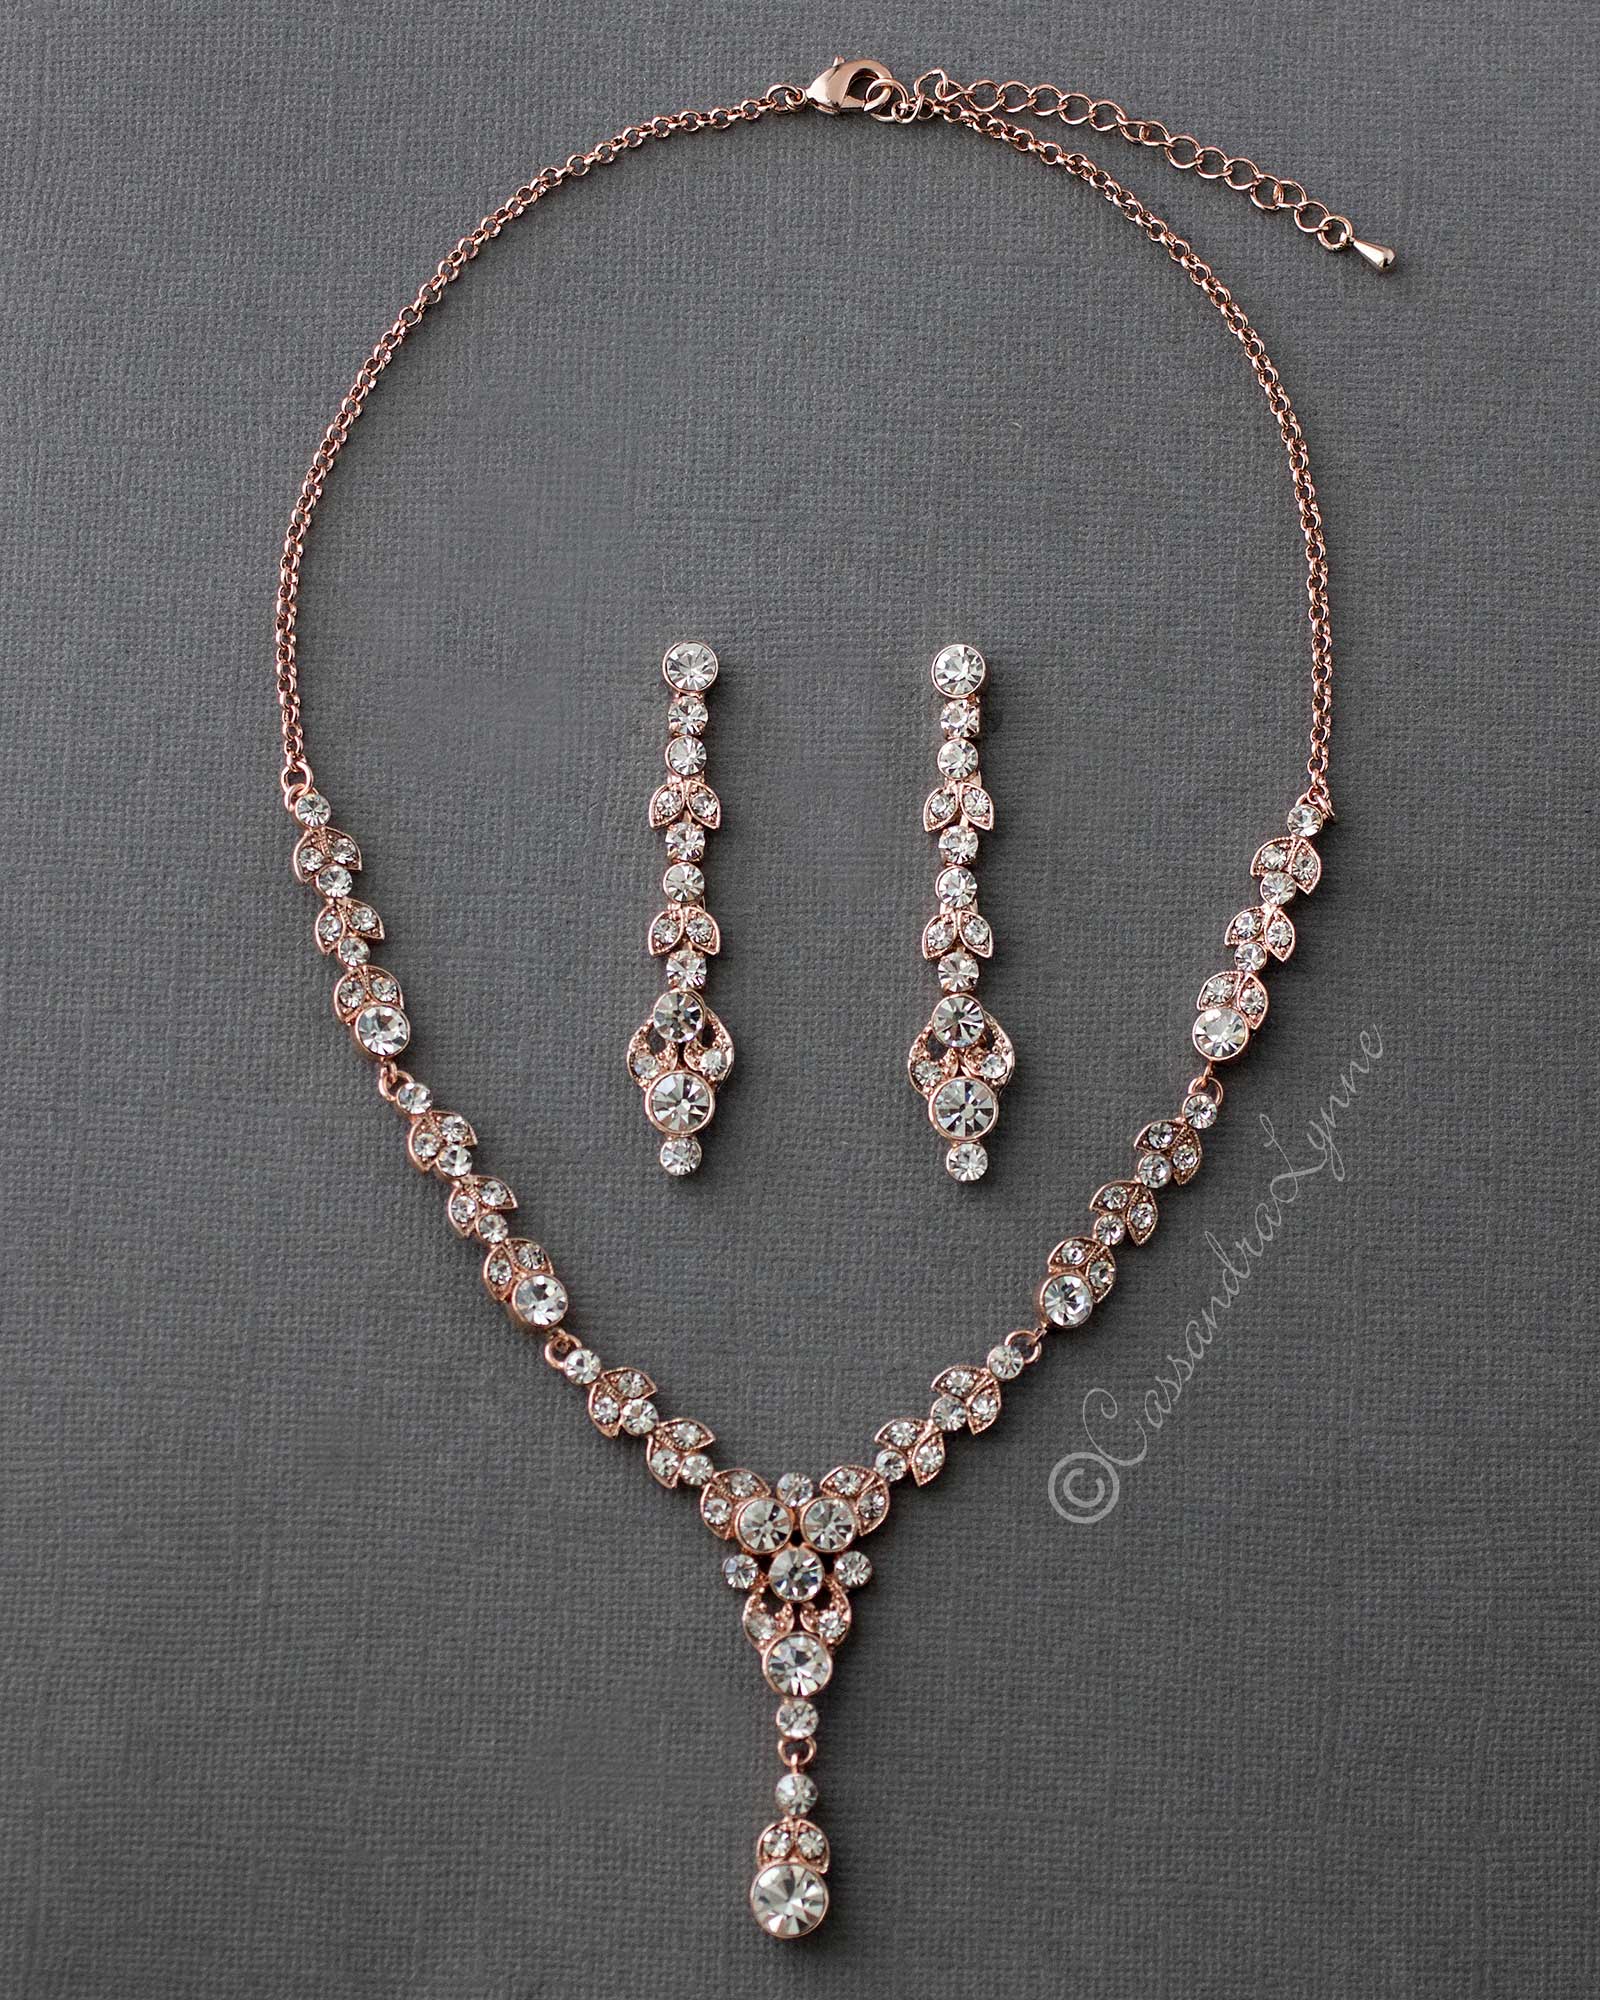 Wedding Jewelry - Bridal Necklace and Earrings Set - Available in Rose Gold  and Silver | ADORA by Simona